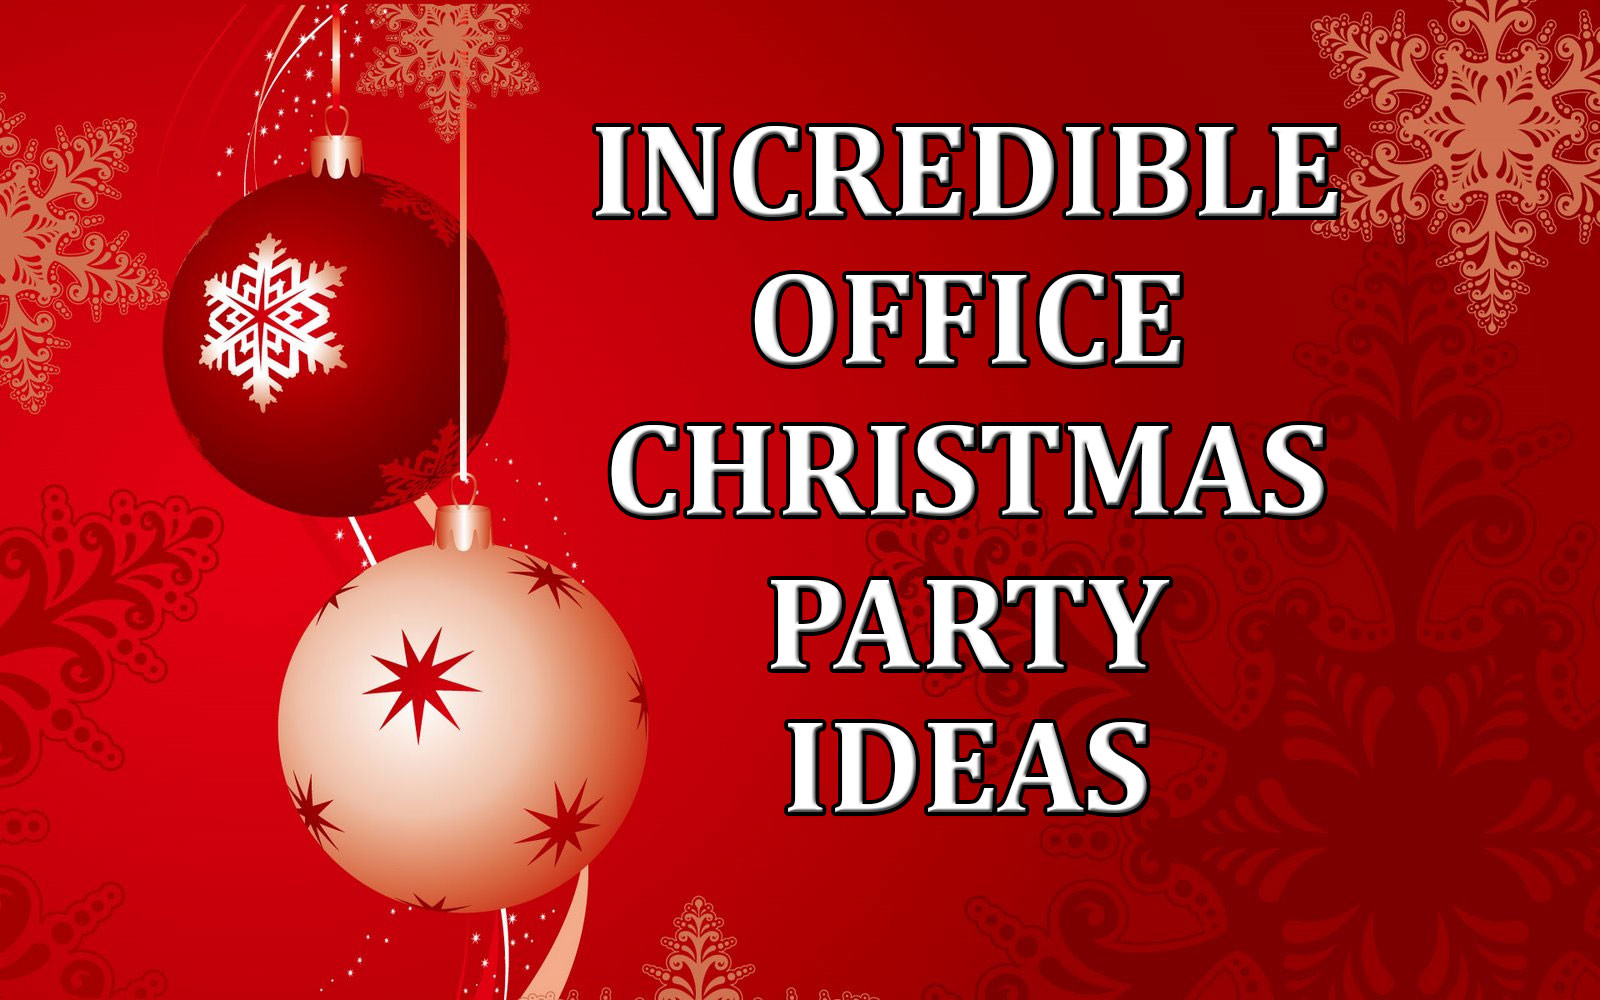 Ideas For Office Christmas Party
 Incredible fice Christmas Party Ideas edy Ventriloquist